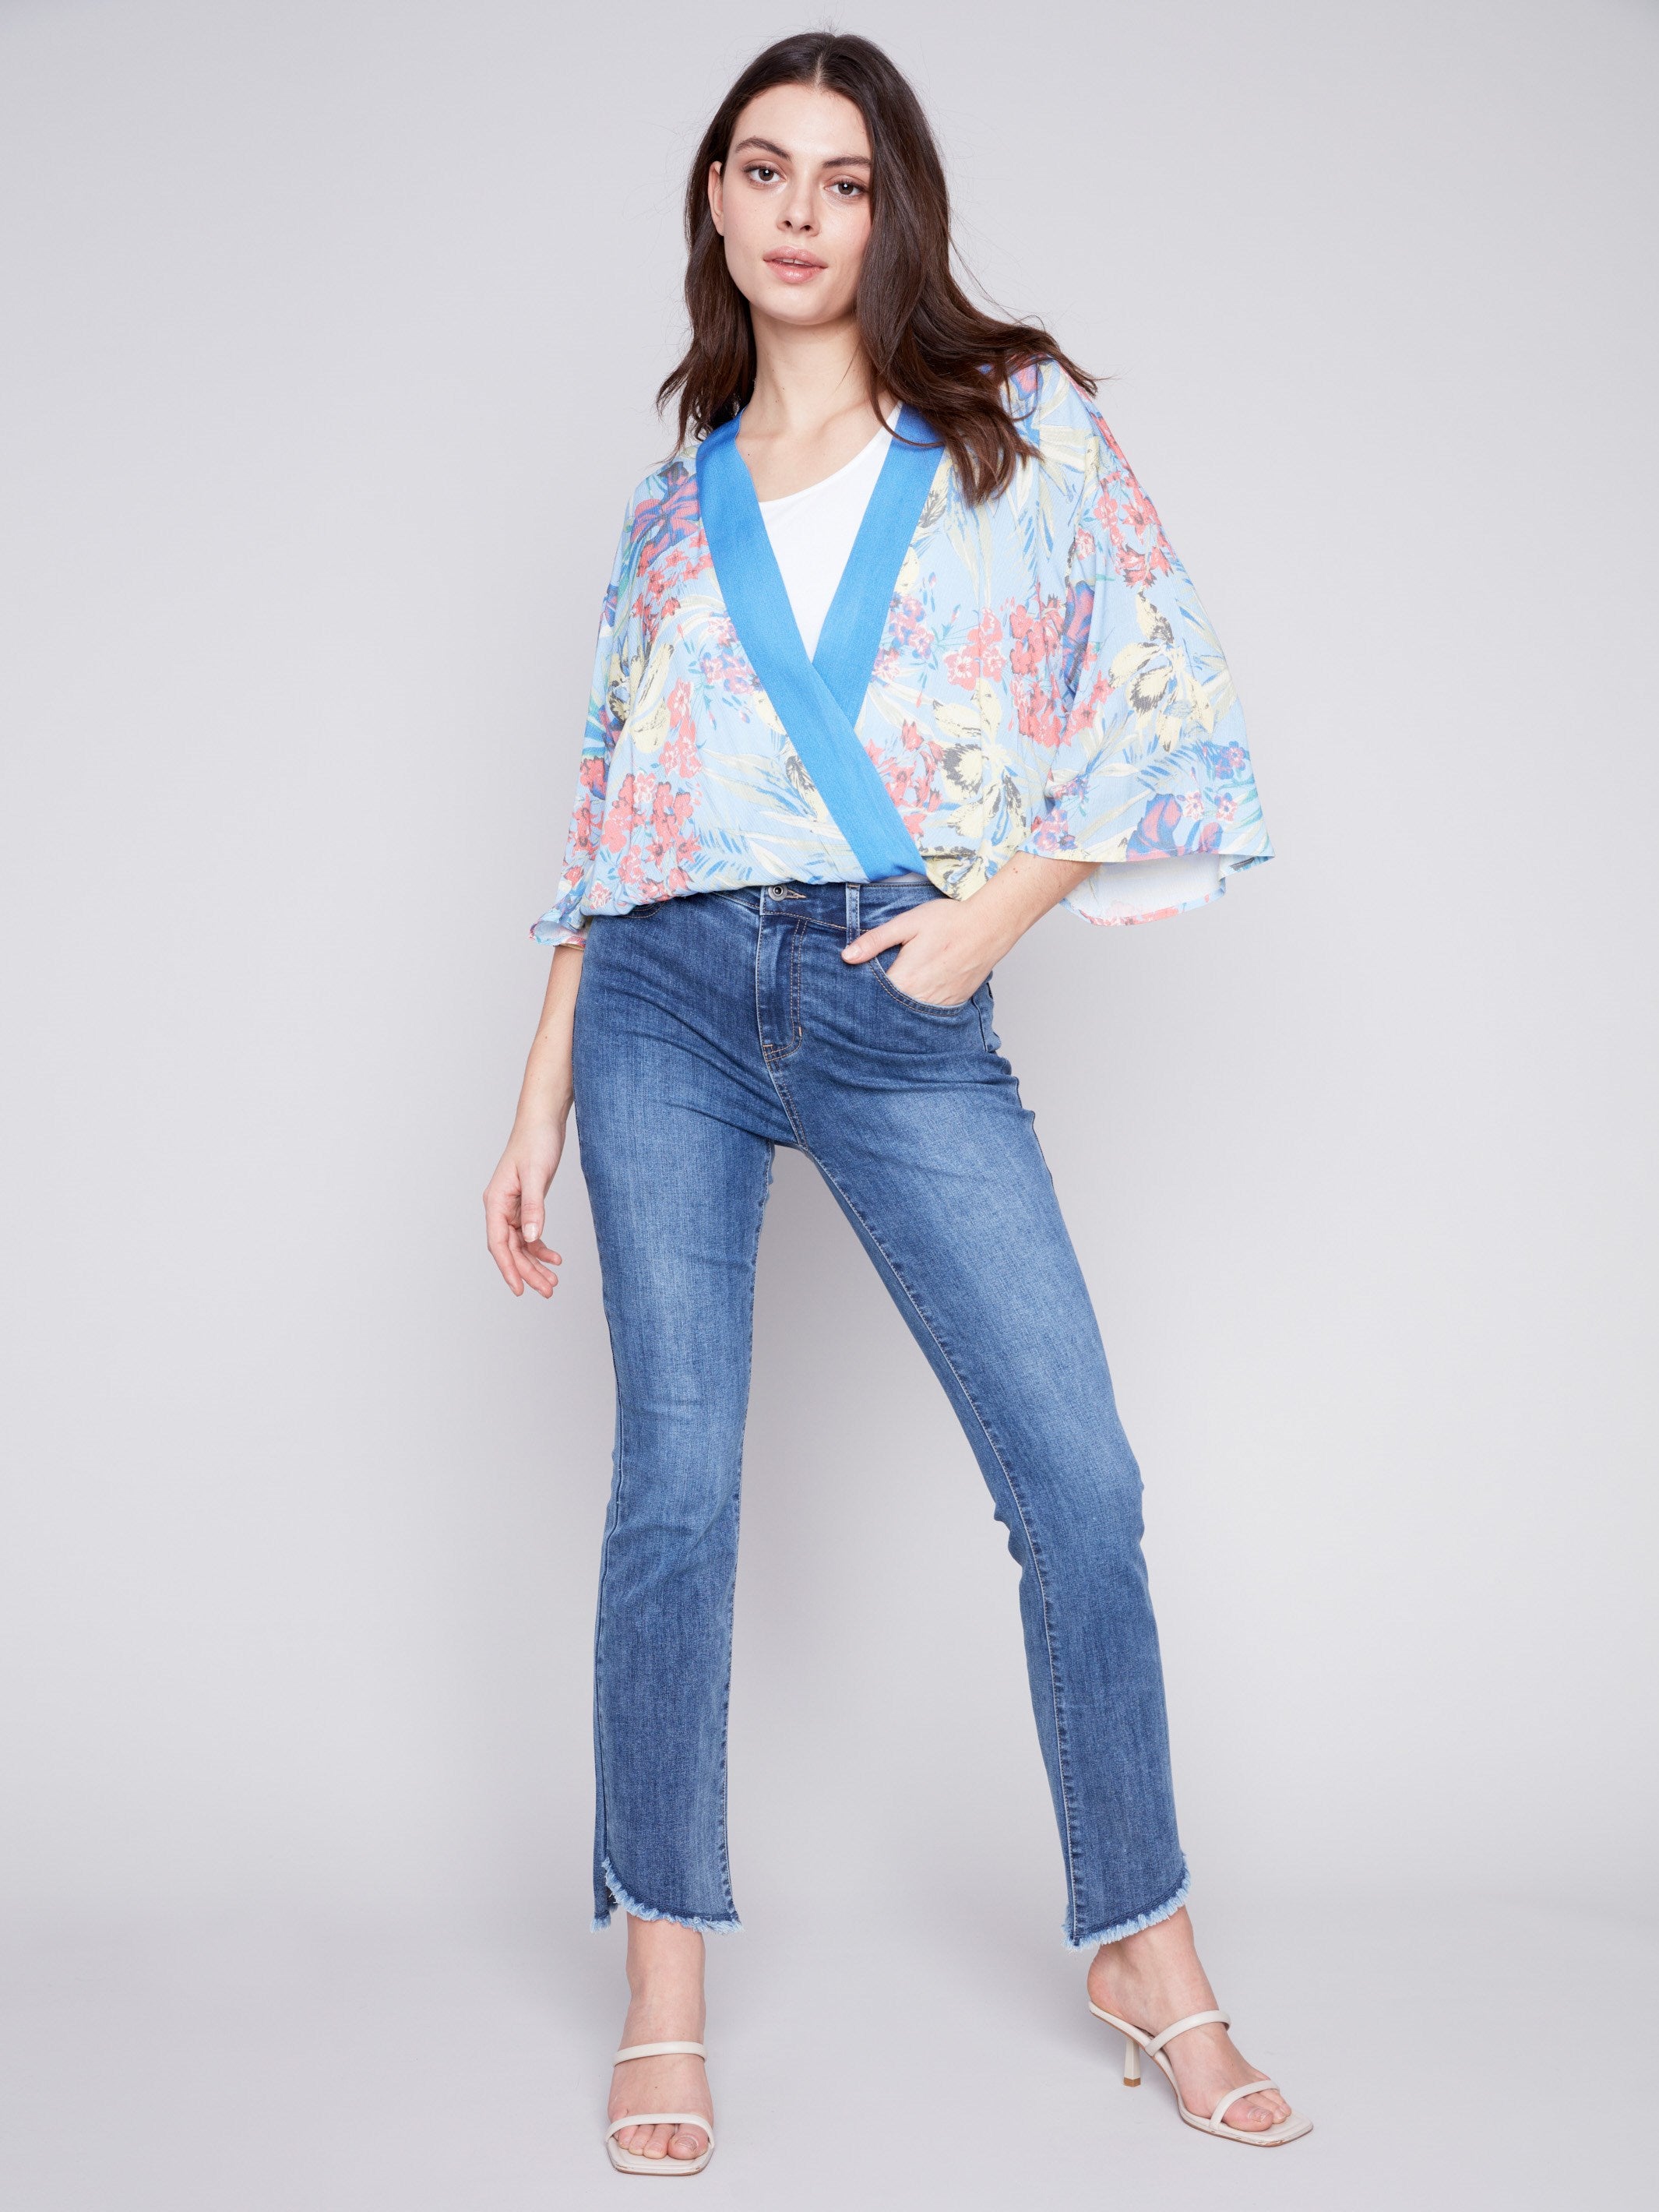 Charlie B Printed Overlap Blouse - Lillypad - Image 4